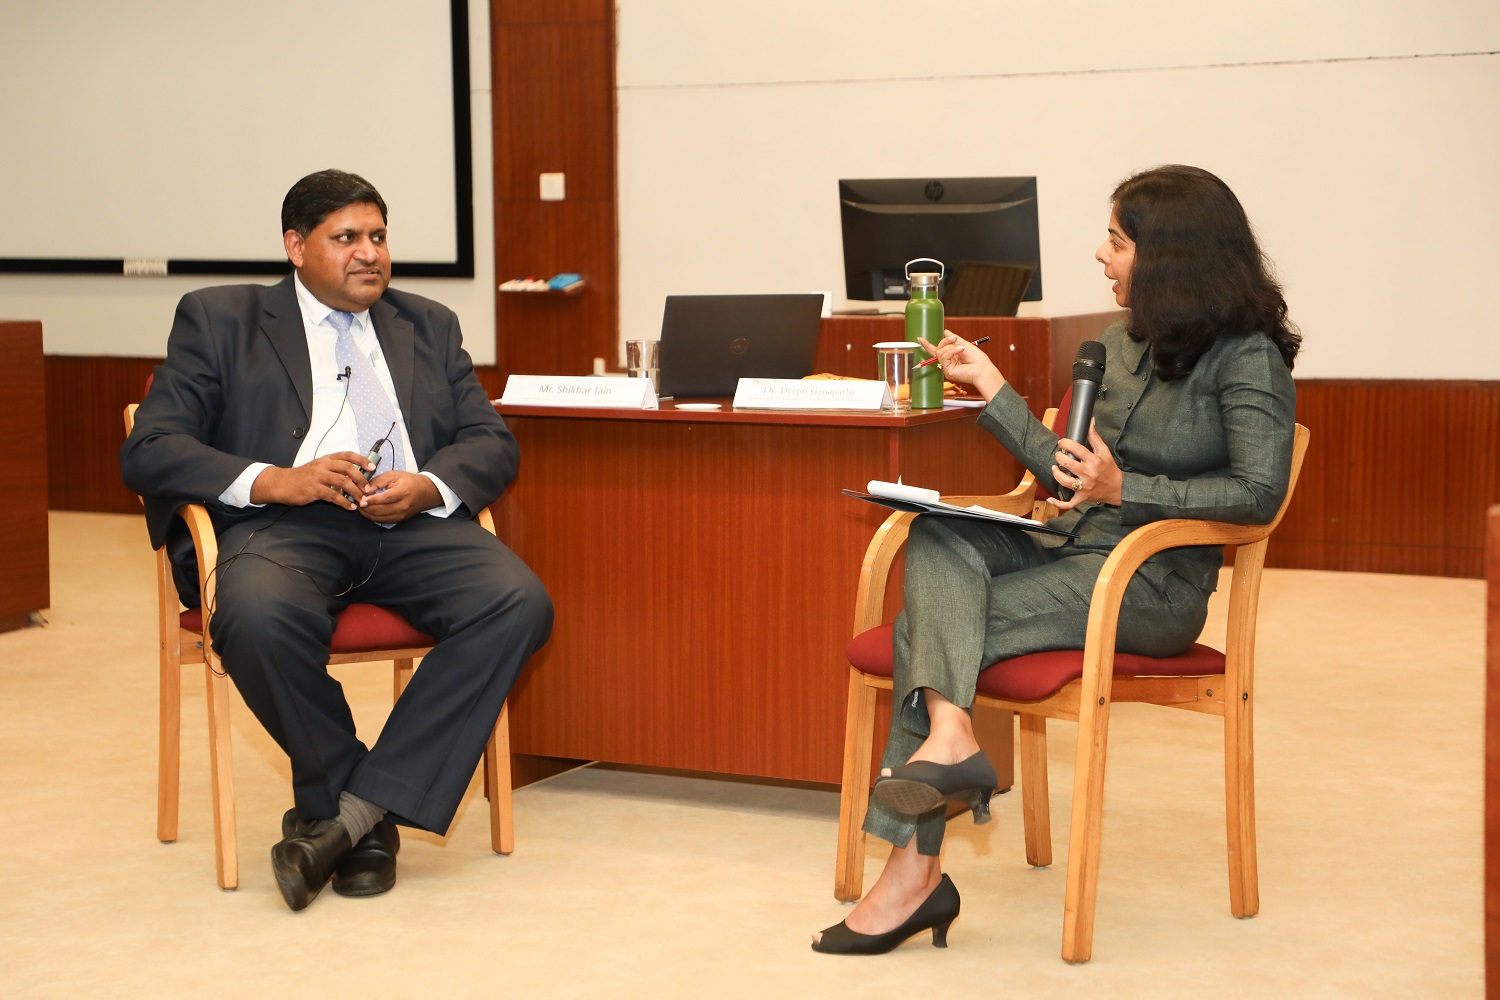 The Centre for Management Communication and ENS Club of IIMB, in collaboration with CII-ITC, organized a speaker event as part of the World Environment Day activities at IIMB. The talk, titled, ‘ESG & Business Strategy: Reaching New Frontiers with the Triple Bottom Line’, featured a conversation between Shikhar Jain, Deputy Head at the Centre of Excellence for Sustainable Development at CII-Delhi and Prof. Deepti Ganapathy, Chairperson, Centre for Management Communication, IIMB.